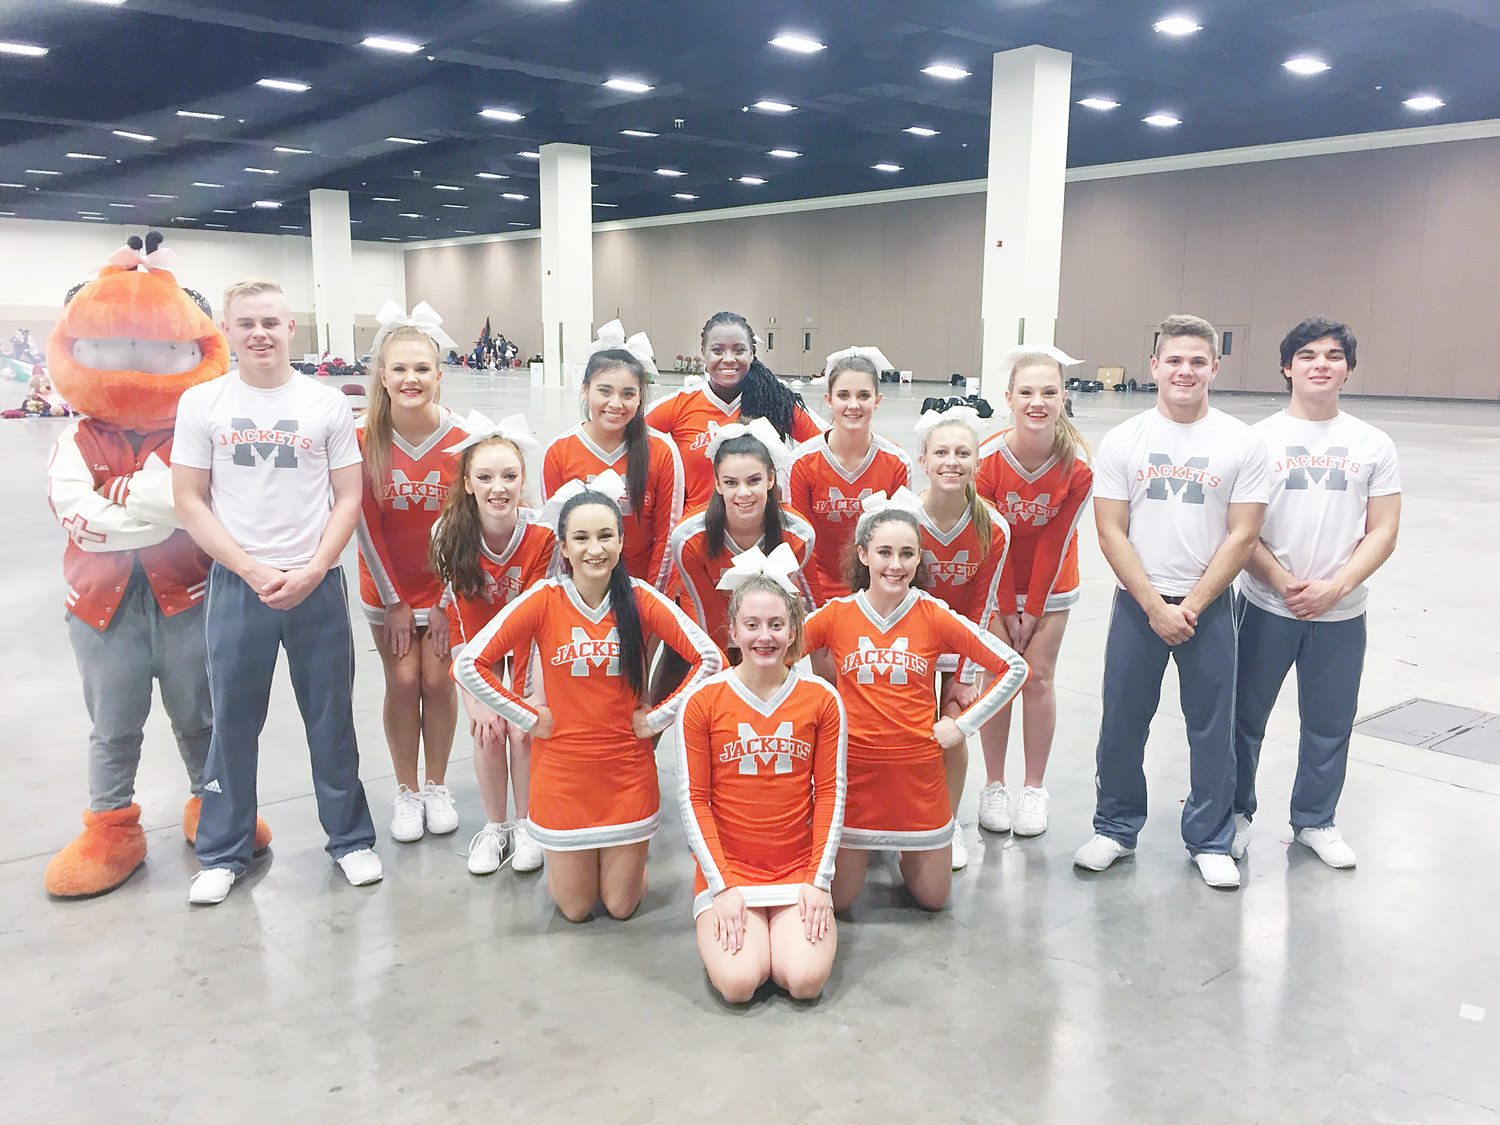 The Mineola High School Cheer Squad placed fourth in the Small Coed Division at the 2nd Annual Texas UIL Spirit State Championship in Ft. Worth on Jan. 11. At the UIL Spirit State Championships schools are judged in three categories: fight song, time-out band dance and time-out cheer. Pictured are, front row, from left, Gracie Castleberry, Melea Bedford and Emma Brian; back row, from left, Lacie Brown (Buzz), Seth Hudgins, Hallee Griffin, Alexia De la Paz, Tiara Stephens, Caitlyn Hudson, Spring Coleman, Aaron Stanford and Spencer Jones; and middle row, from left, Holly Griffin, Emily Jones and Tristan Kirk. (Courtesy photo)